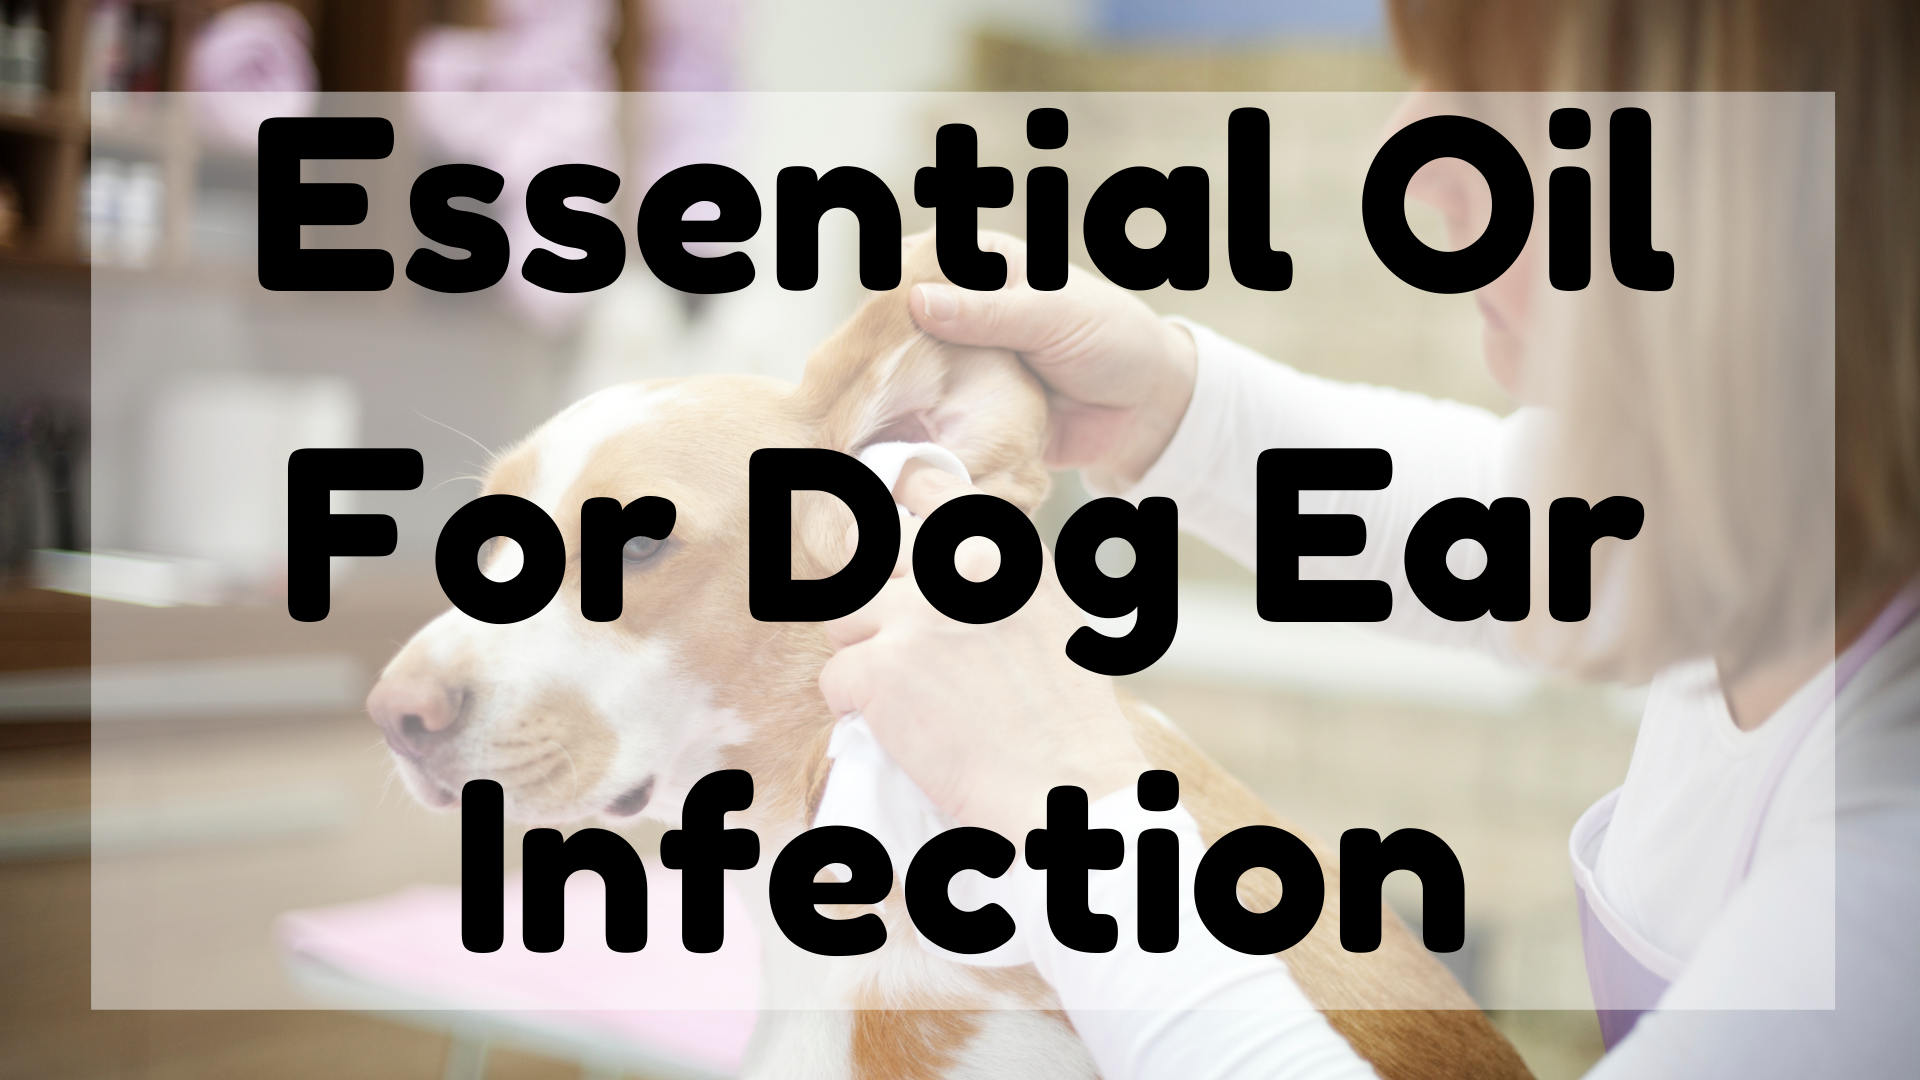 Essential Oil For Dog Ear Infection